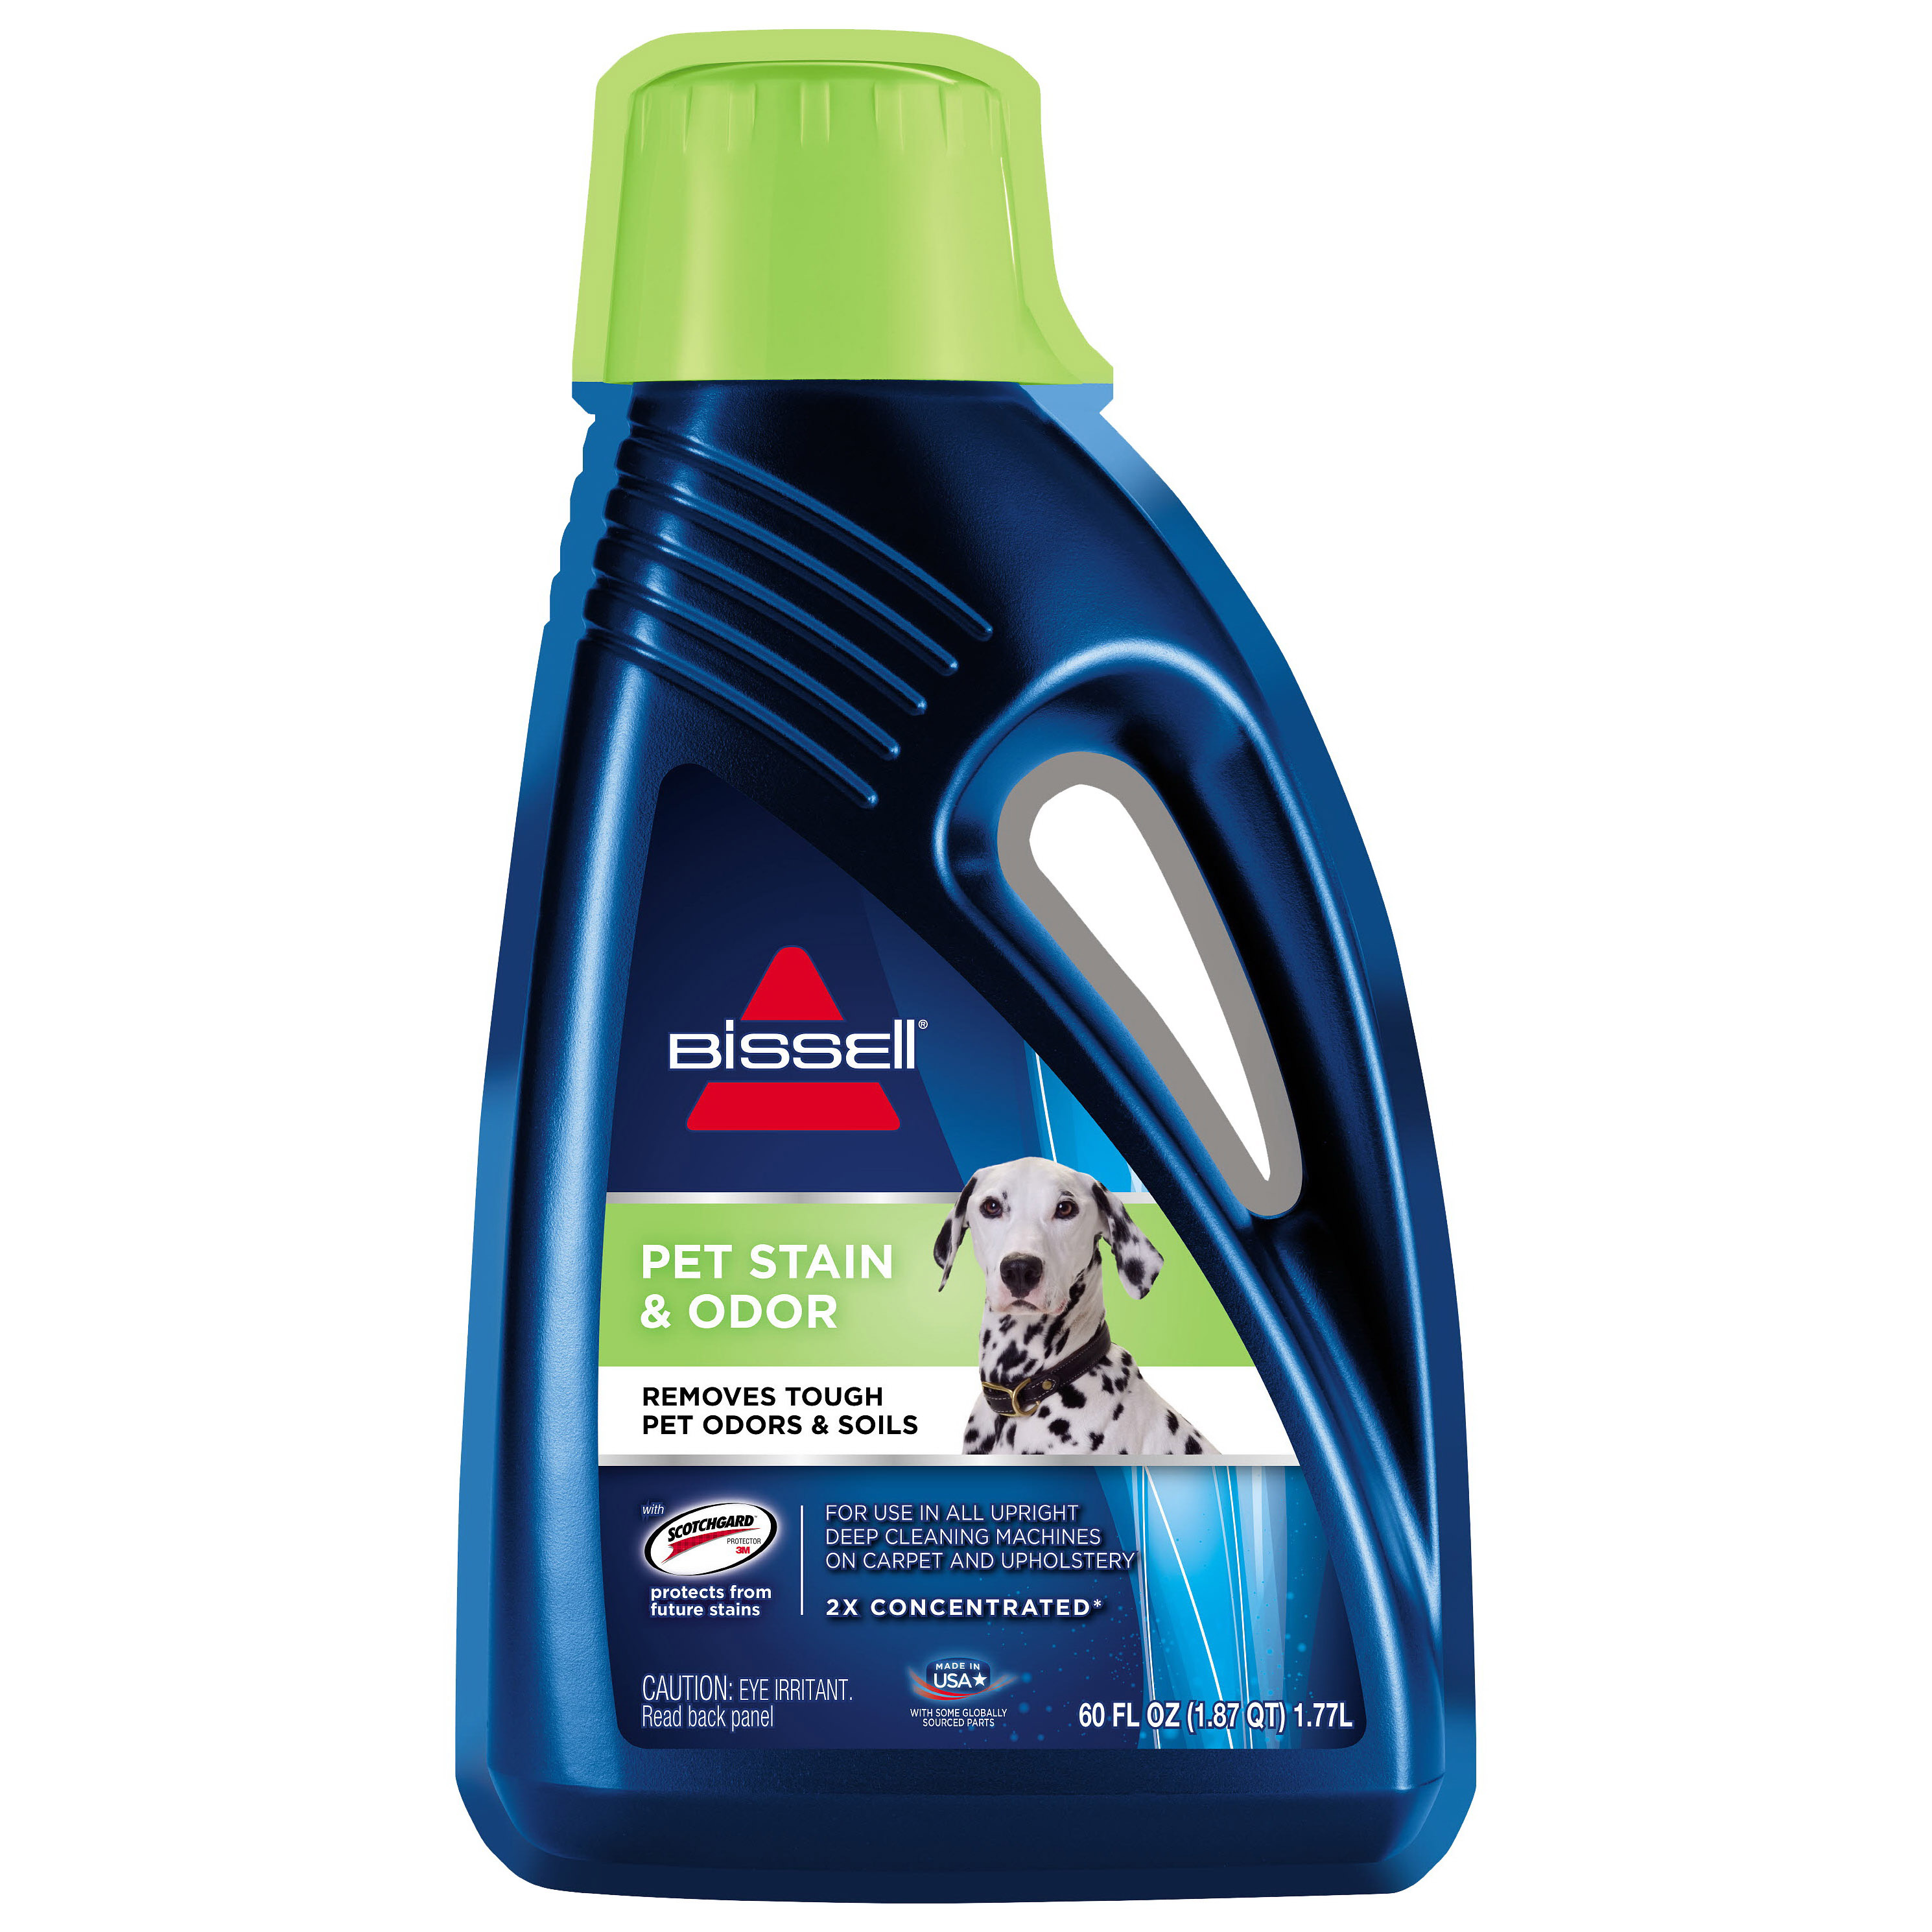 Bissell 99K52 Pet Stain and Odor Remover, Liquid, Characteristic Fragrance, 60 oz, Bottle - 1